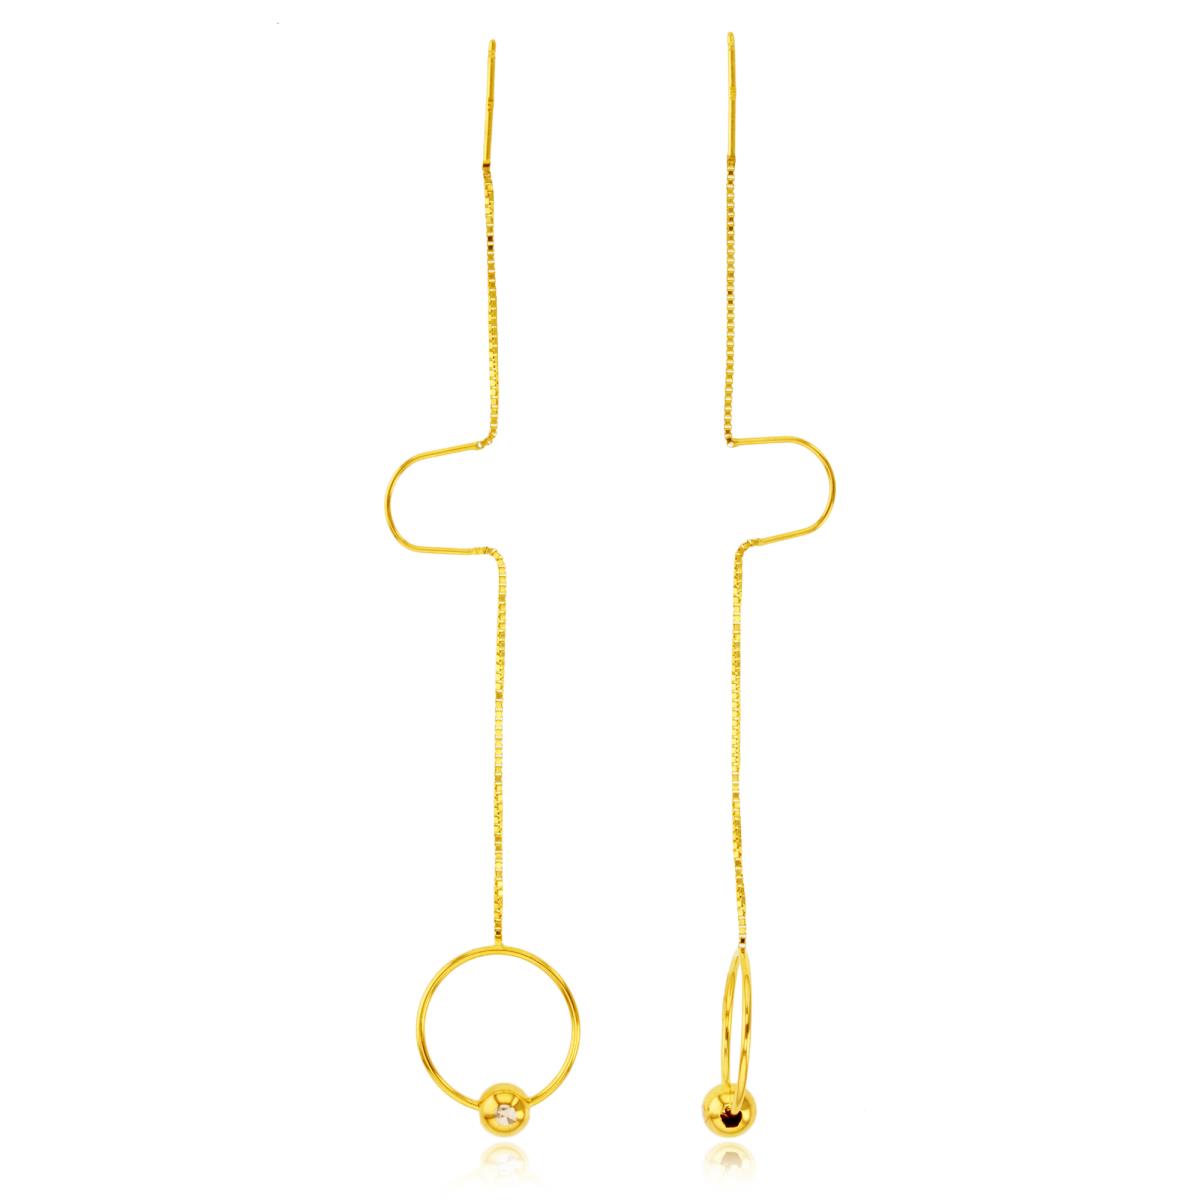 10K Yellow Gold Open Circle with 5mm Bead on Chain Dangling Earring